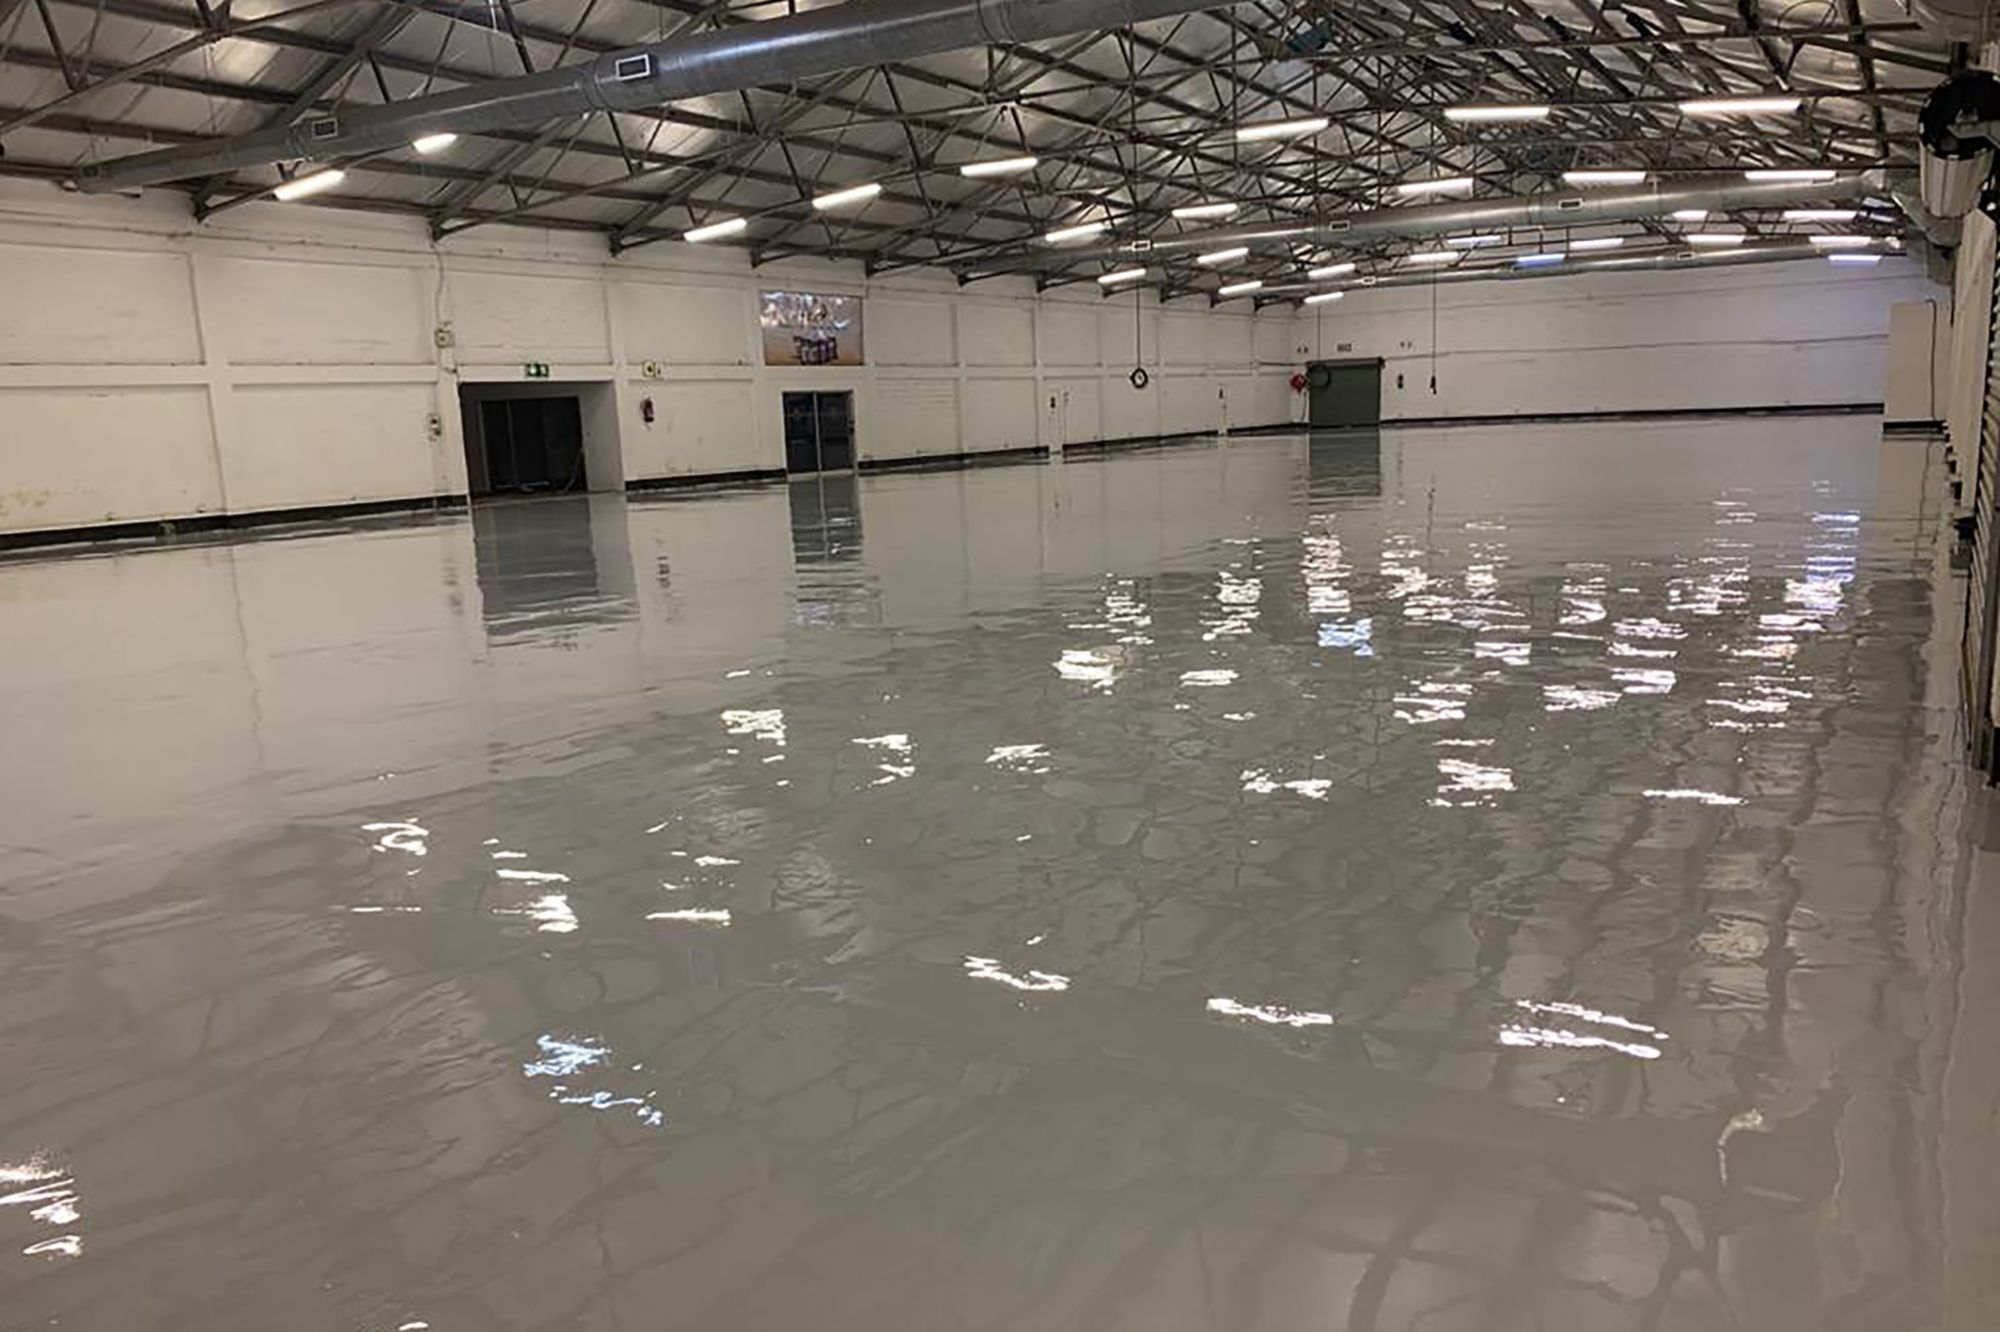 Sika's self-levelling epoxy floor coating were specified to assist the KZN Department of Health with flawlessly smooth floors for COVID health care facility.